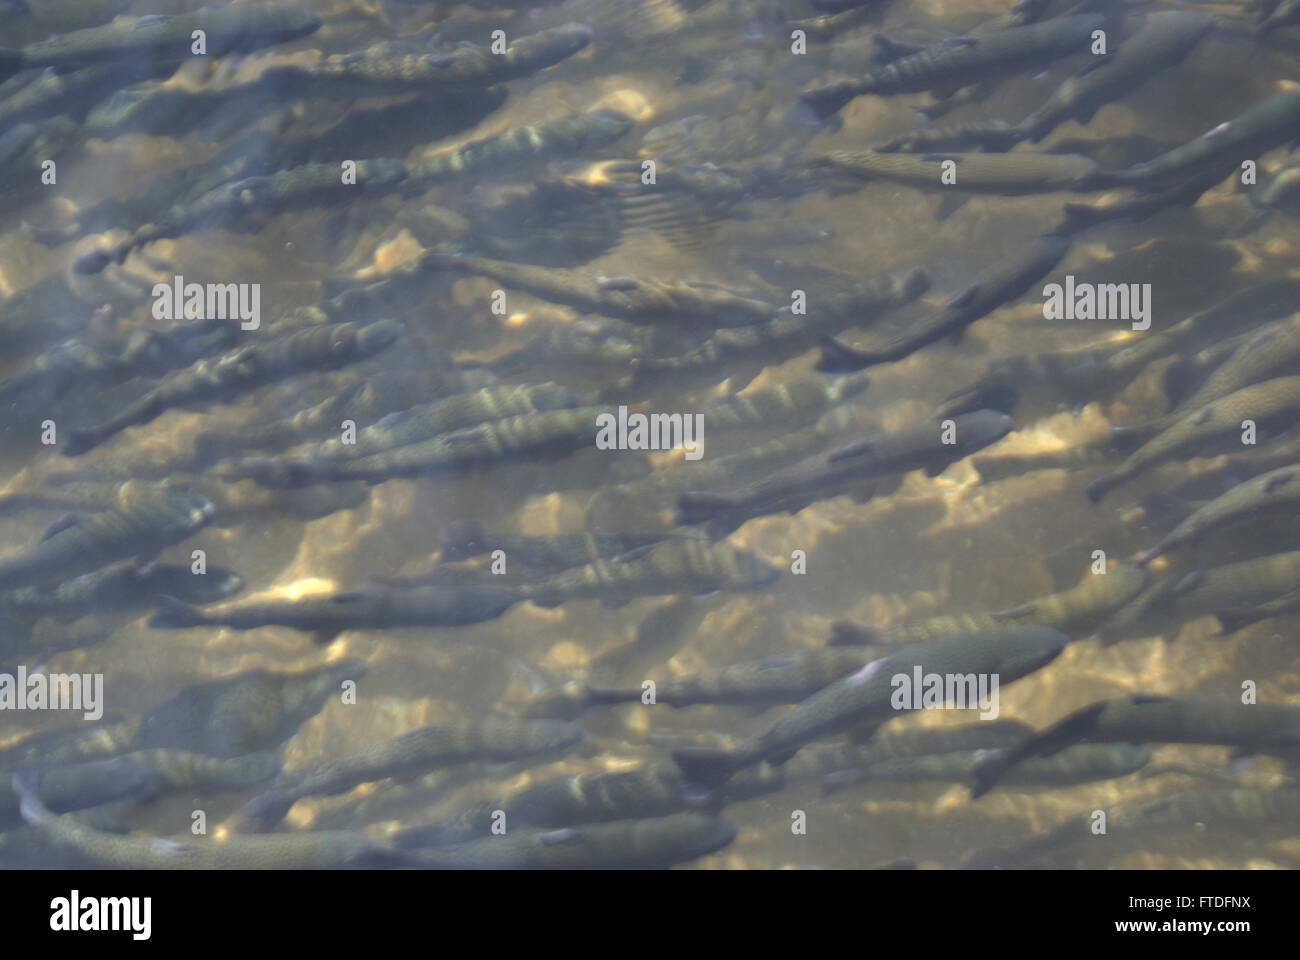 Fish in Laribal Fish Farm tank, Dachhigam, Kashmir, farm for cold water fish including famous trout fish with dots on skin Stock Photo